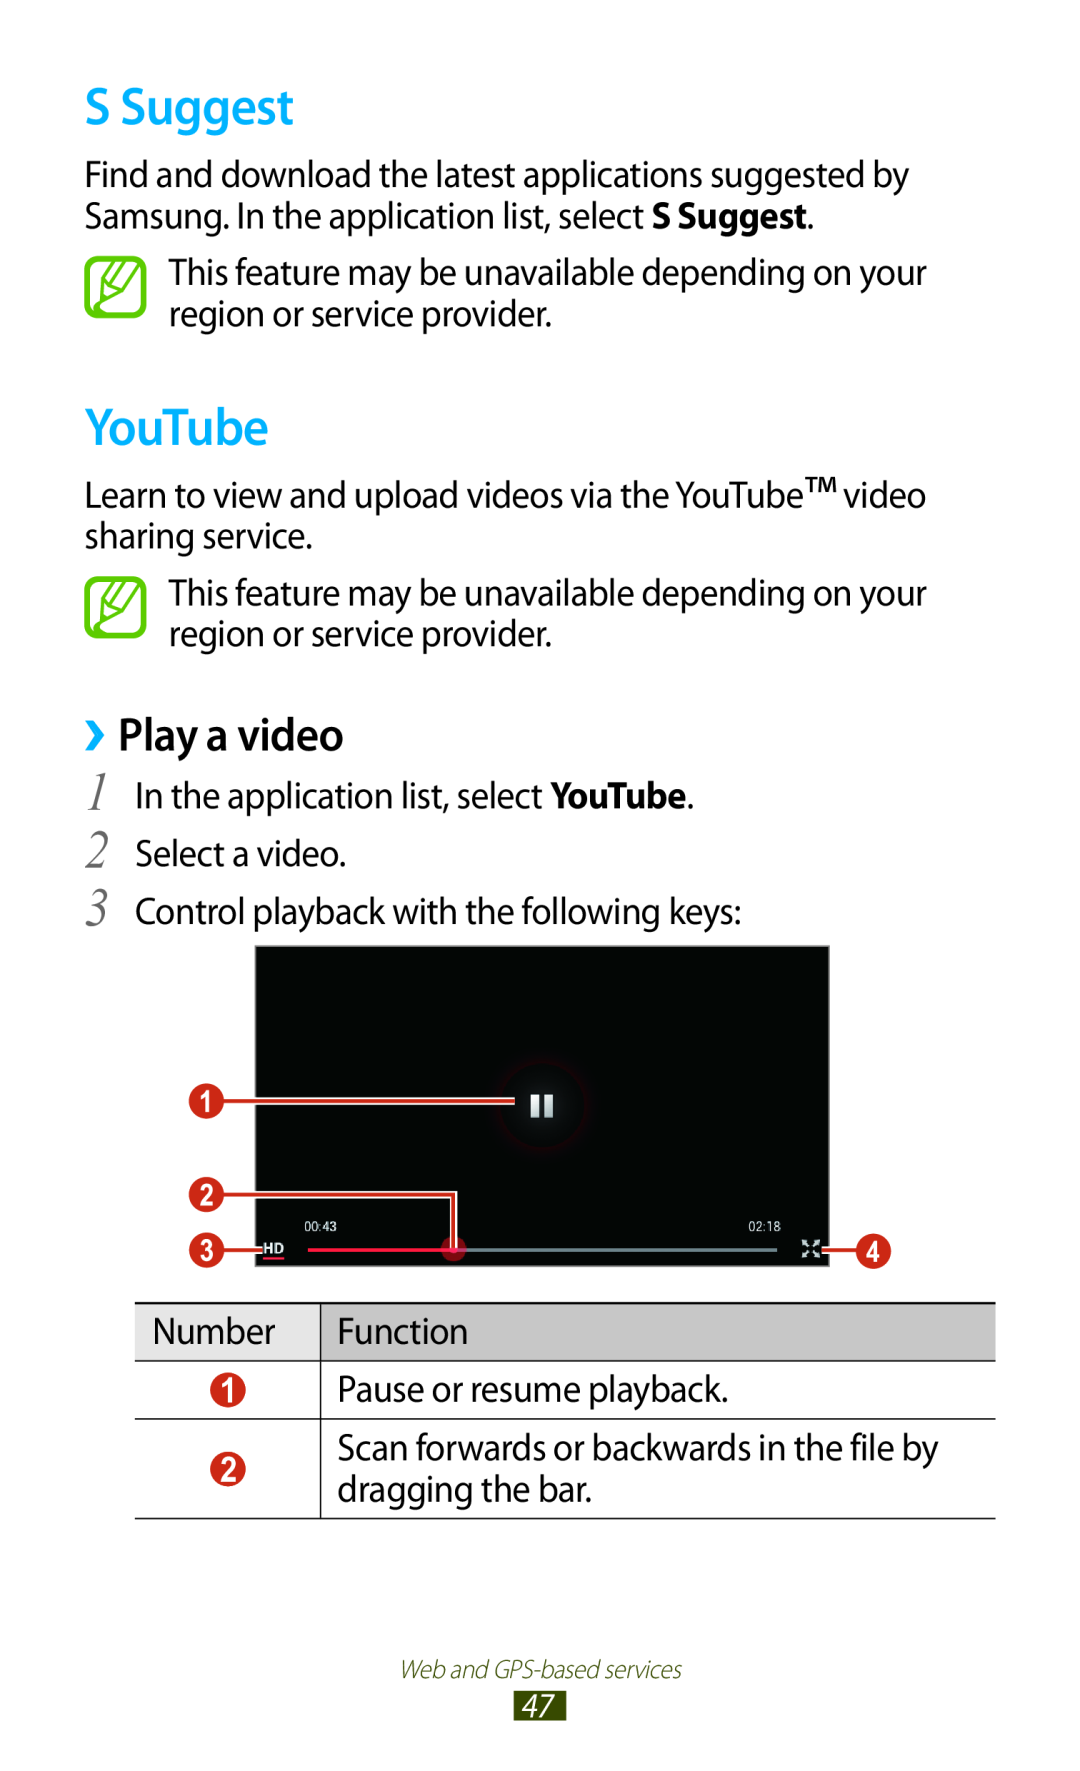 Samsung GTP5110ZWMTTT manual S Suggest, YouTube, ››Play a video 